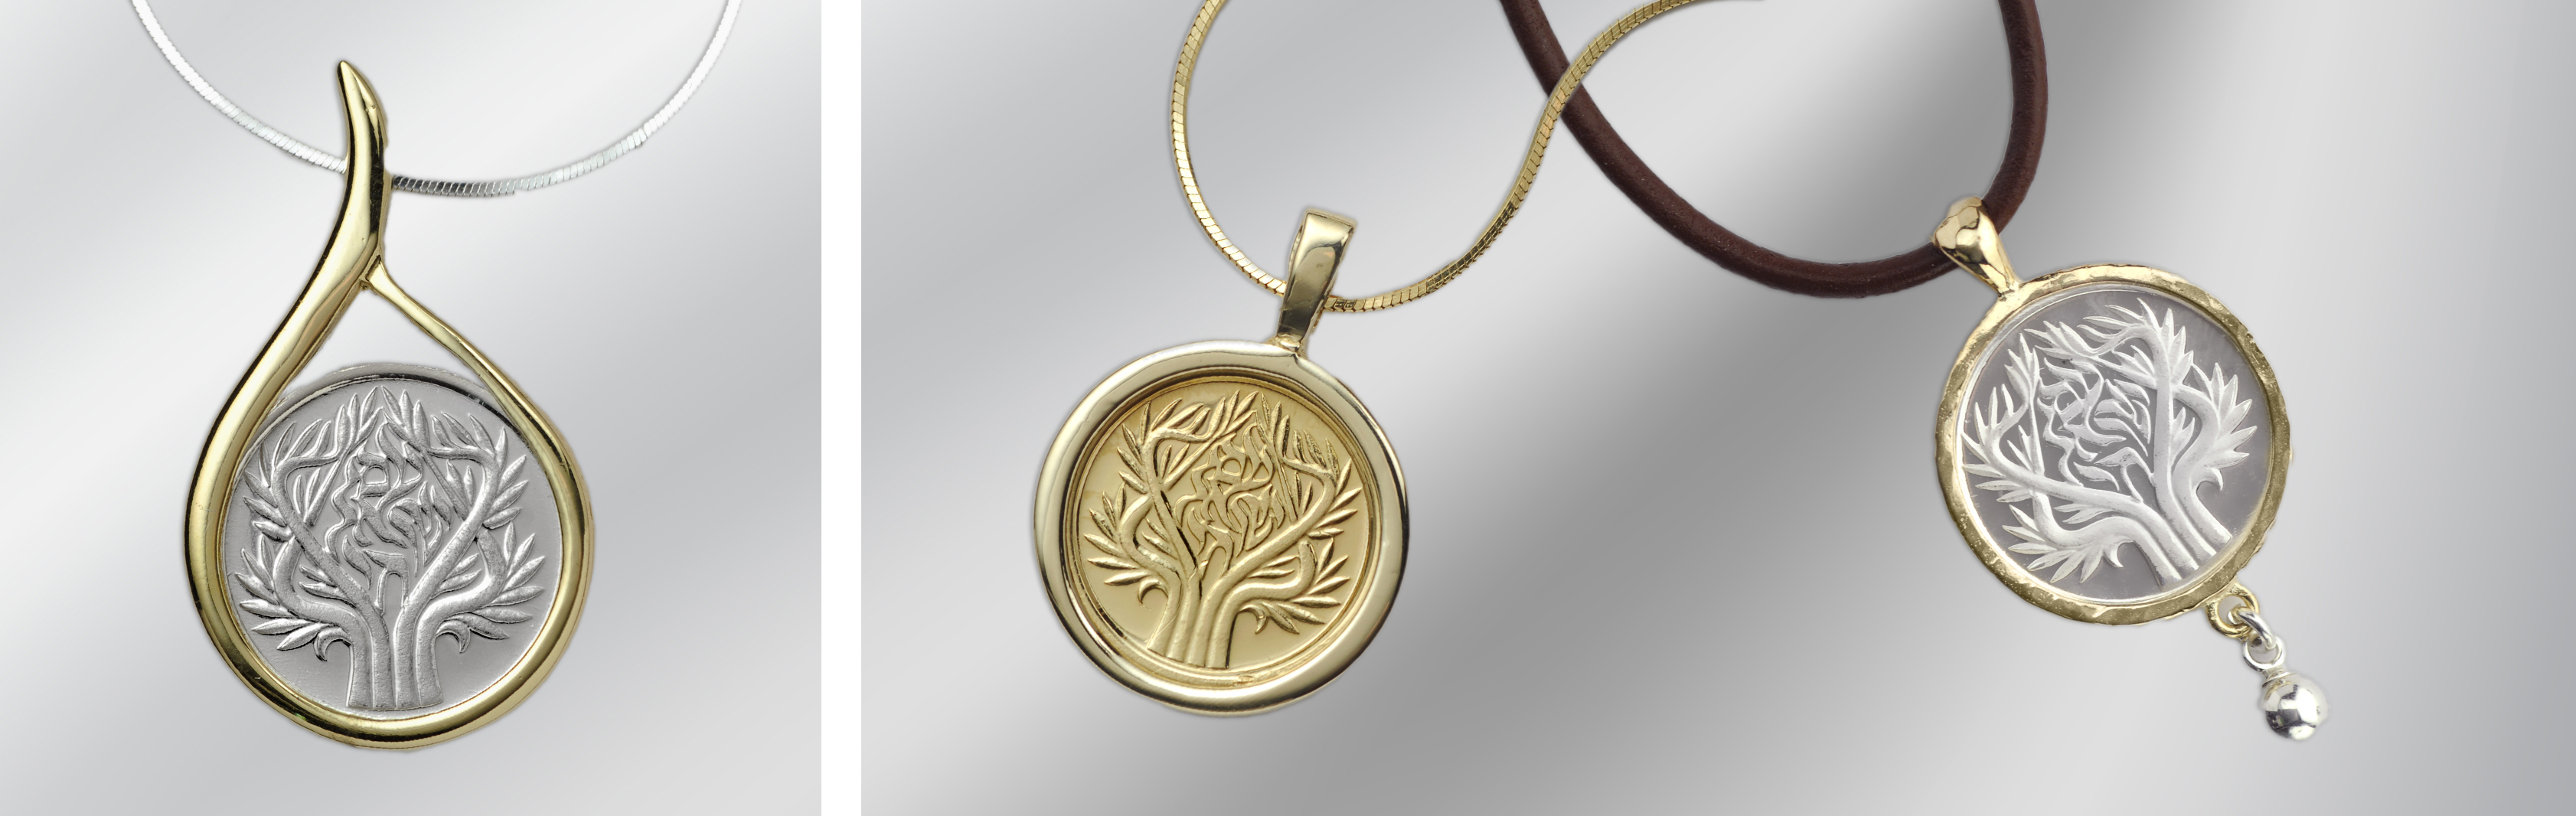 Coin Necklace, Antique Coin Chain, Coin Pendant, Antique Coin Pendant, Coin Jewelry, ICMC, Gras Adlionim, Tree of Life, Tree of Life Jewelry, Tree of Life Necklace, Judaica, Jewish Jewelry, Men's Necklace, Silver Man Jewelry, Bar Mitzvah Gift, Bat Mitzvah